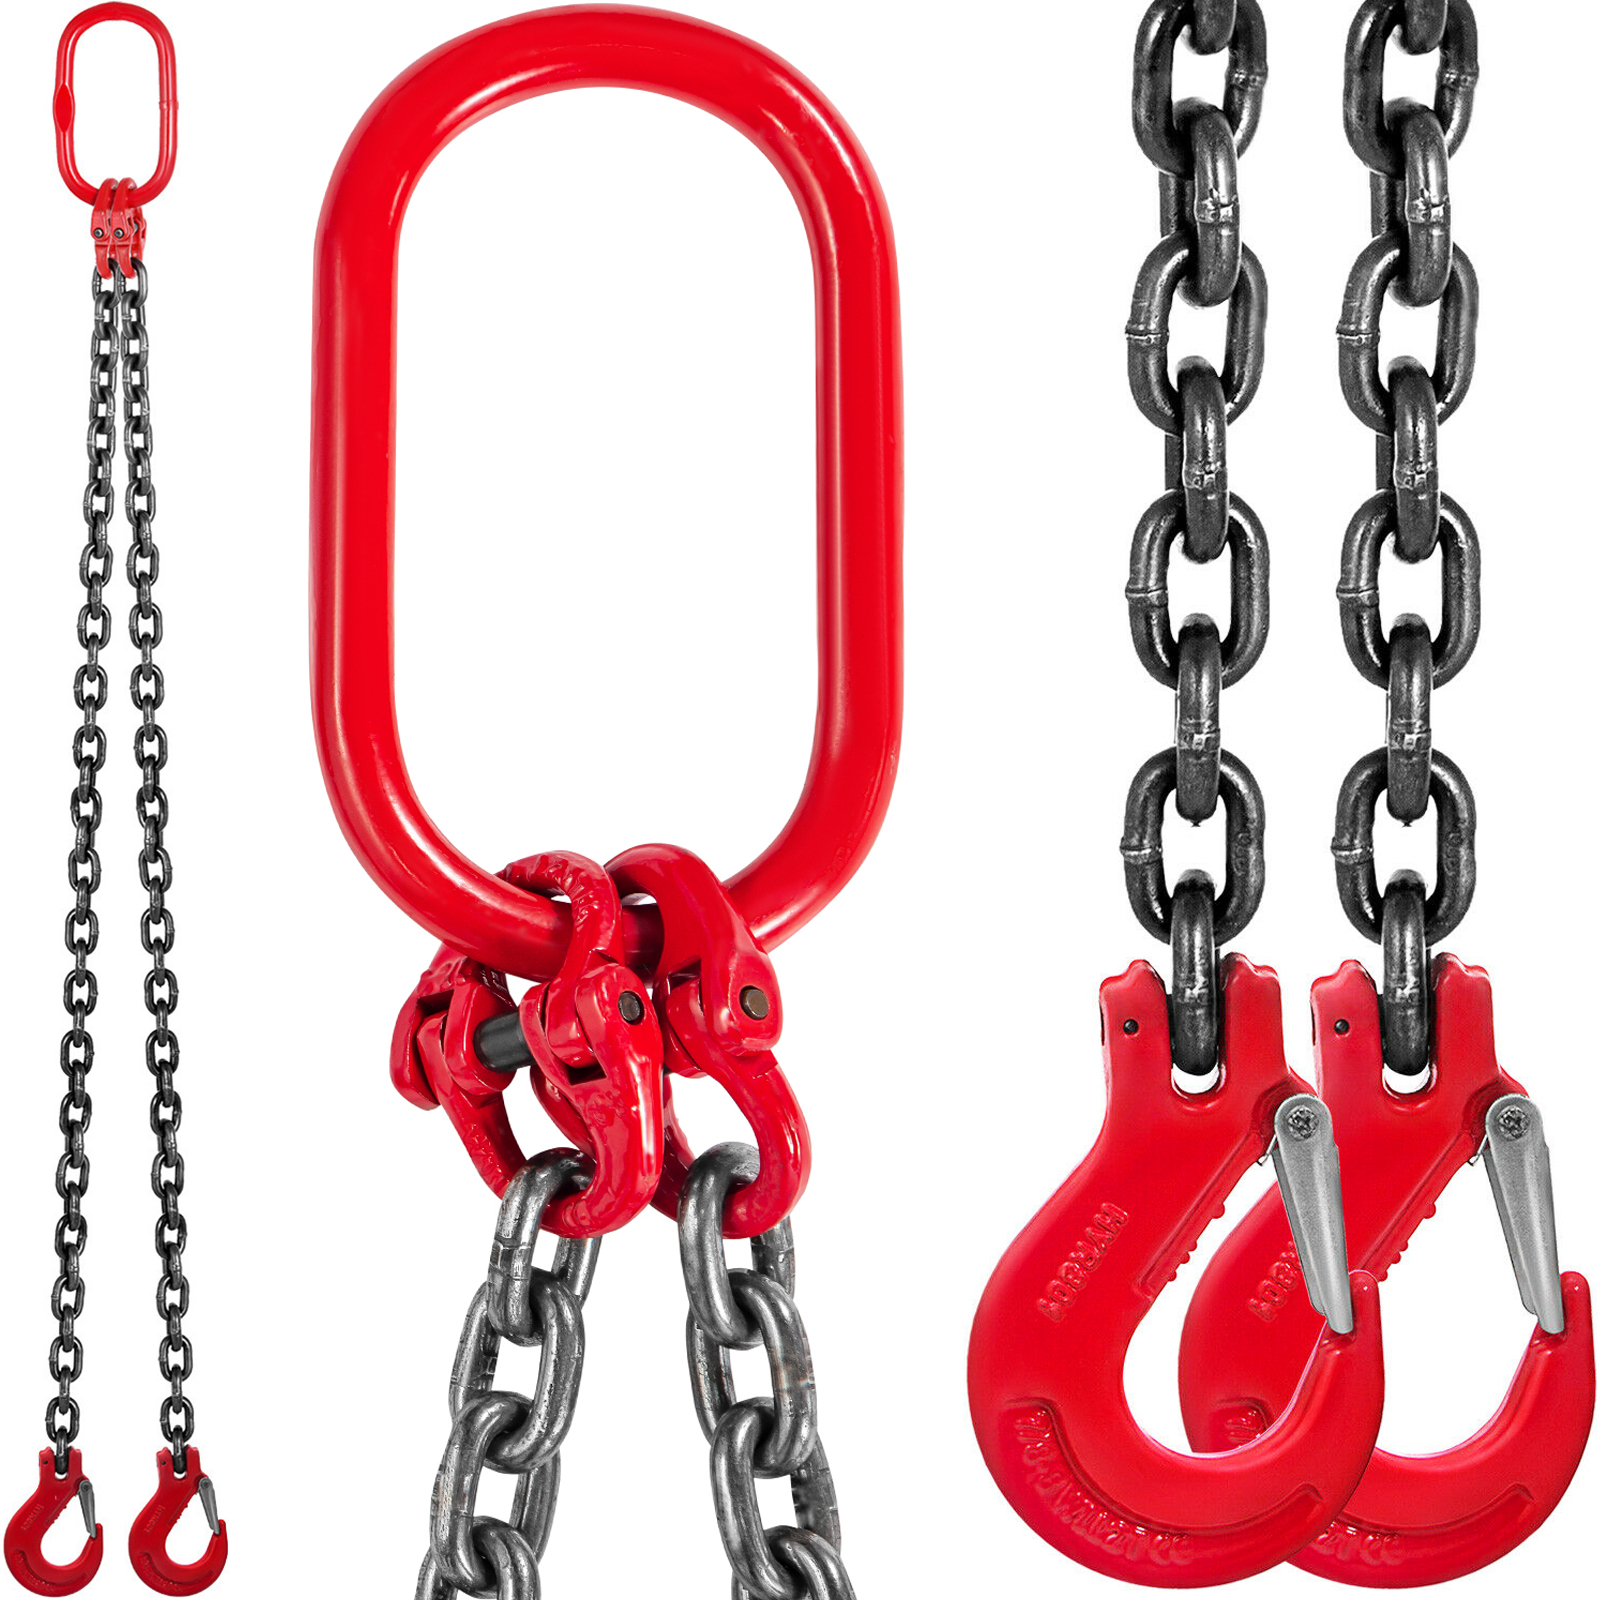 Grade 100 Chain Sling 3/8" x 6' Double Leg with Grab Hook and Adjusters 